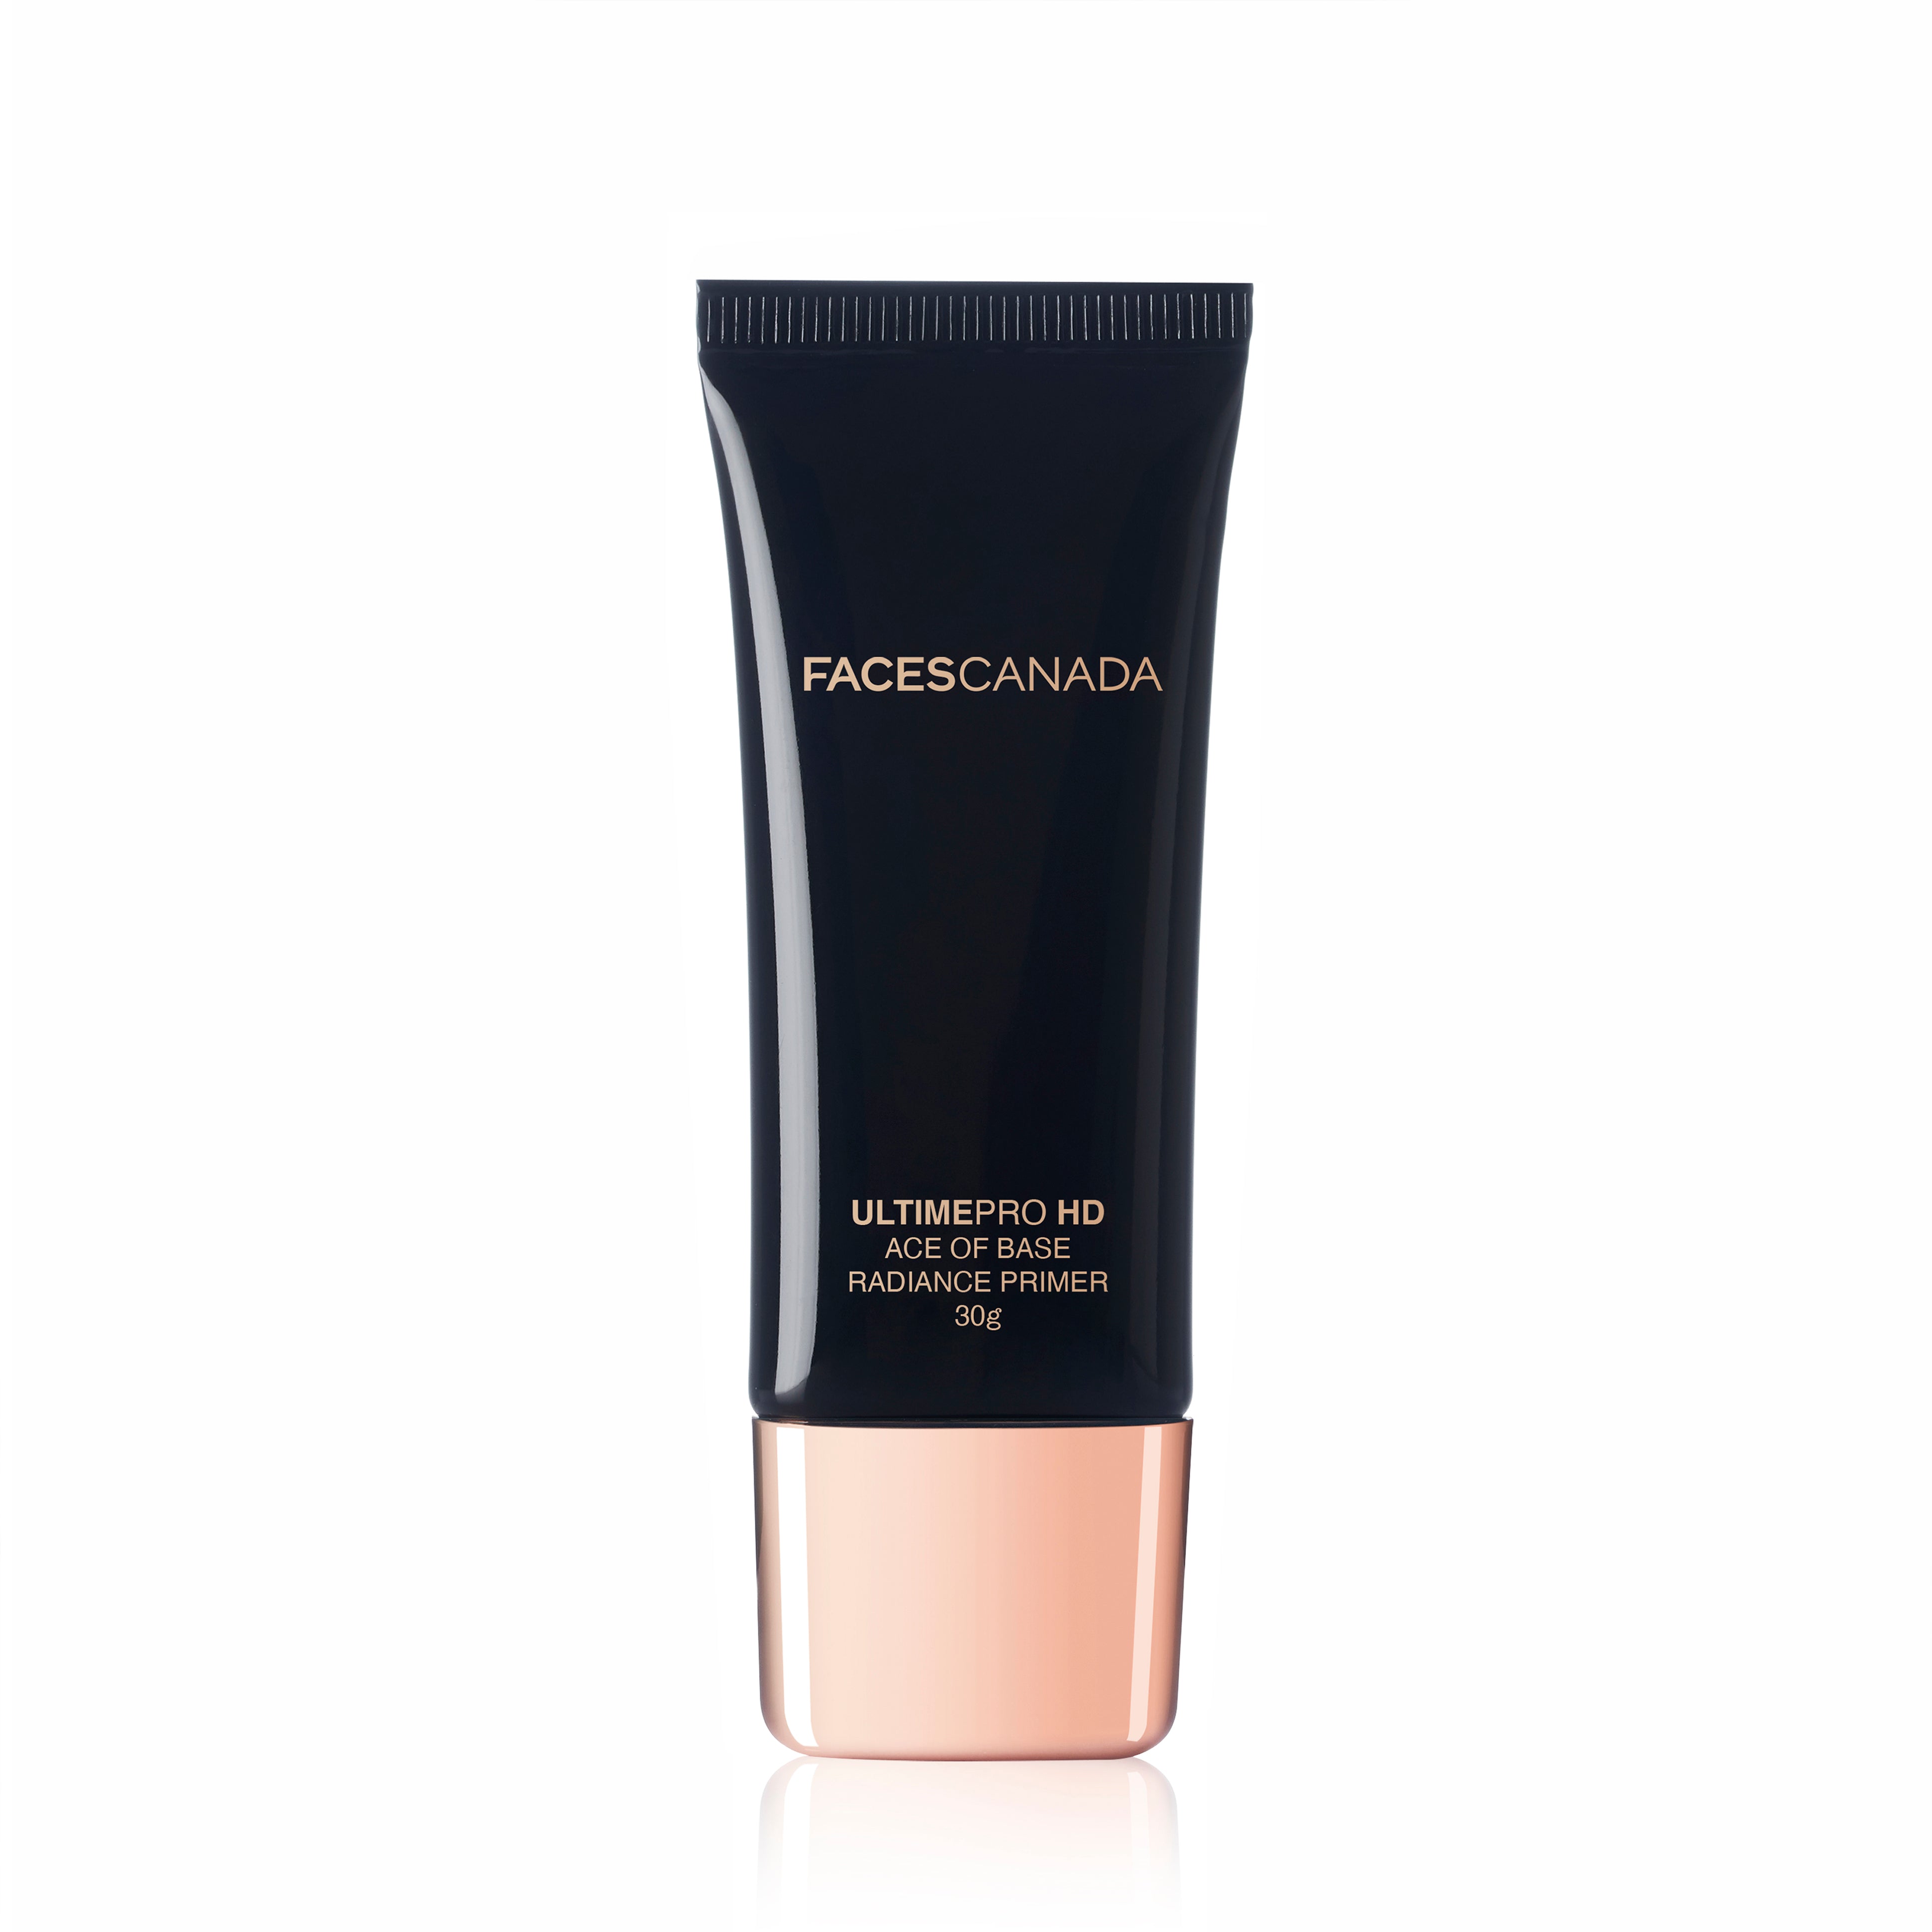 Faces Canada Ultime Pro HD Ace Base Radiance Primer Faces Canada